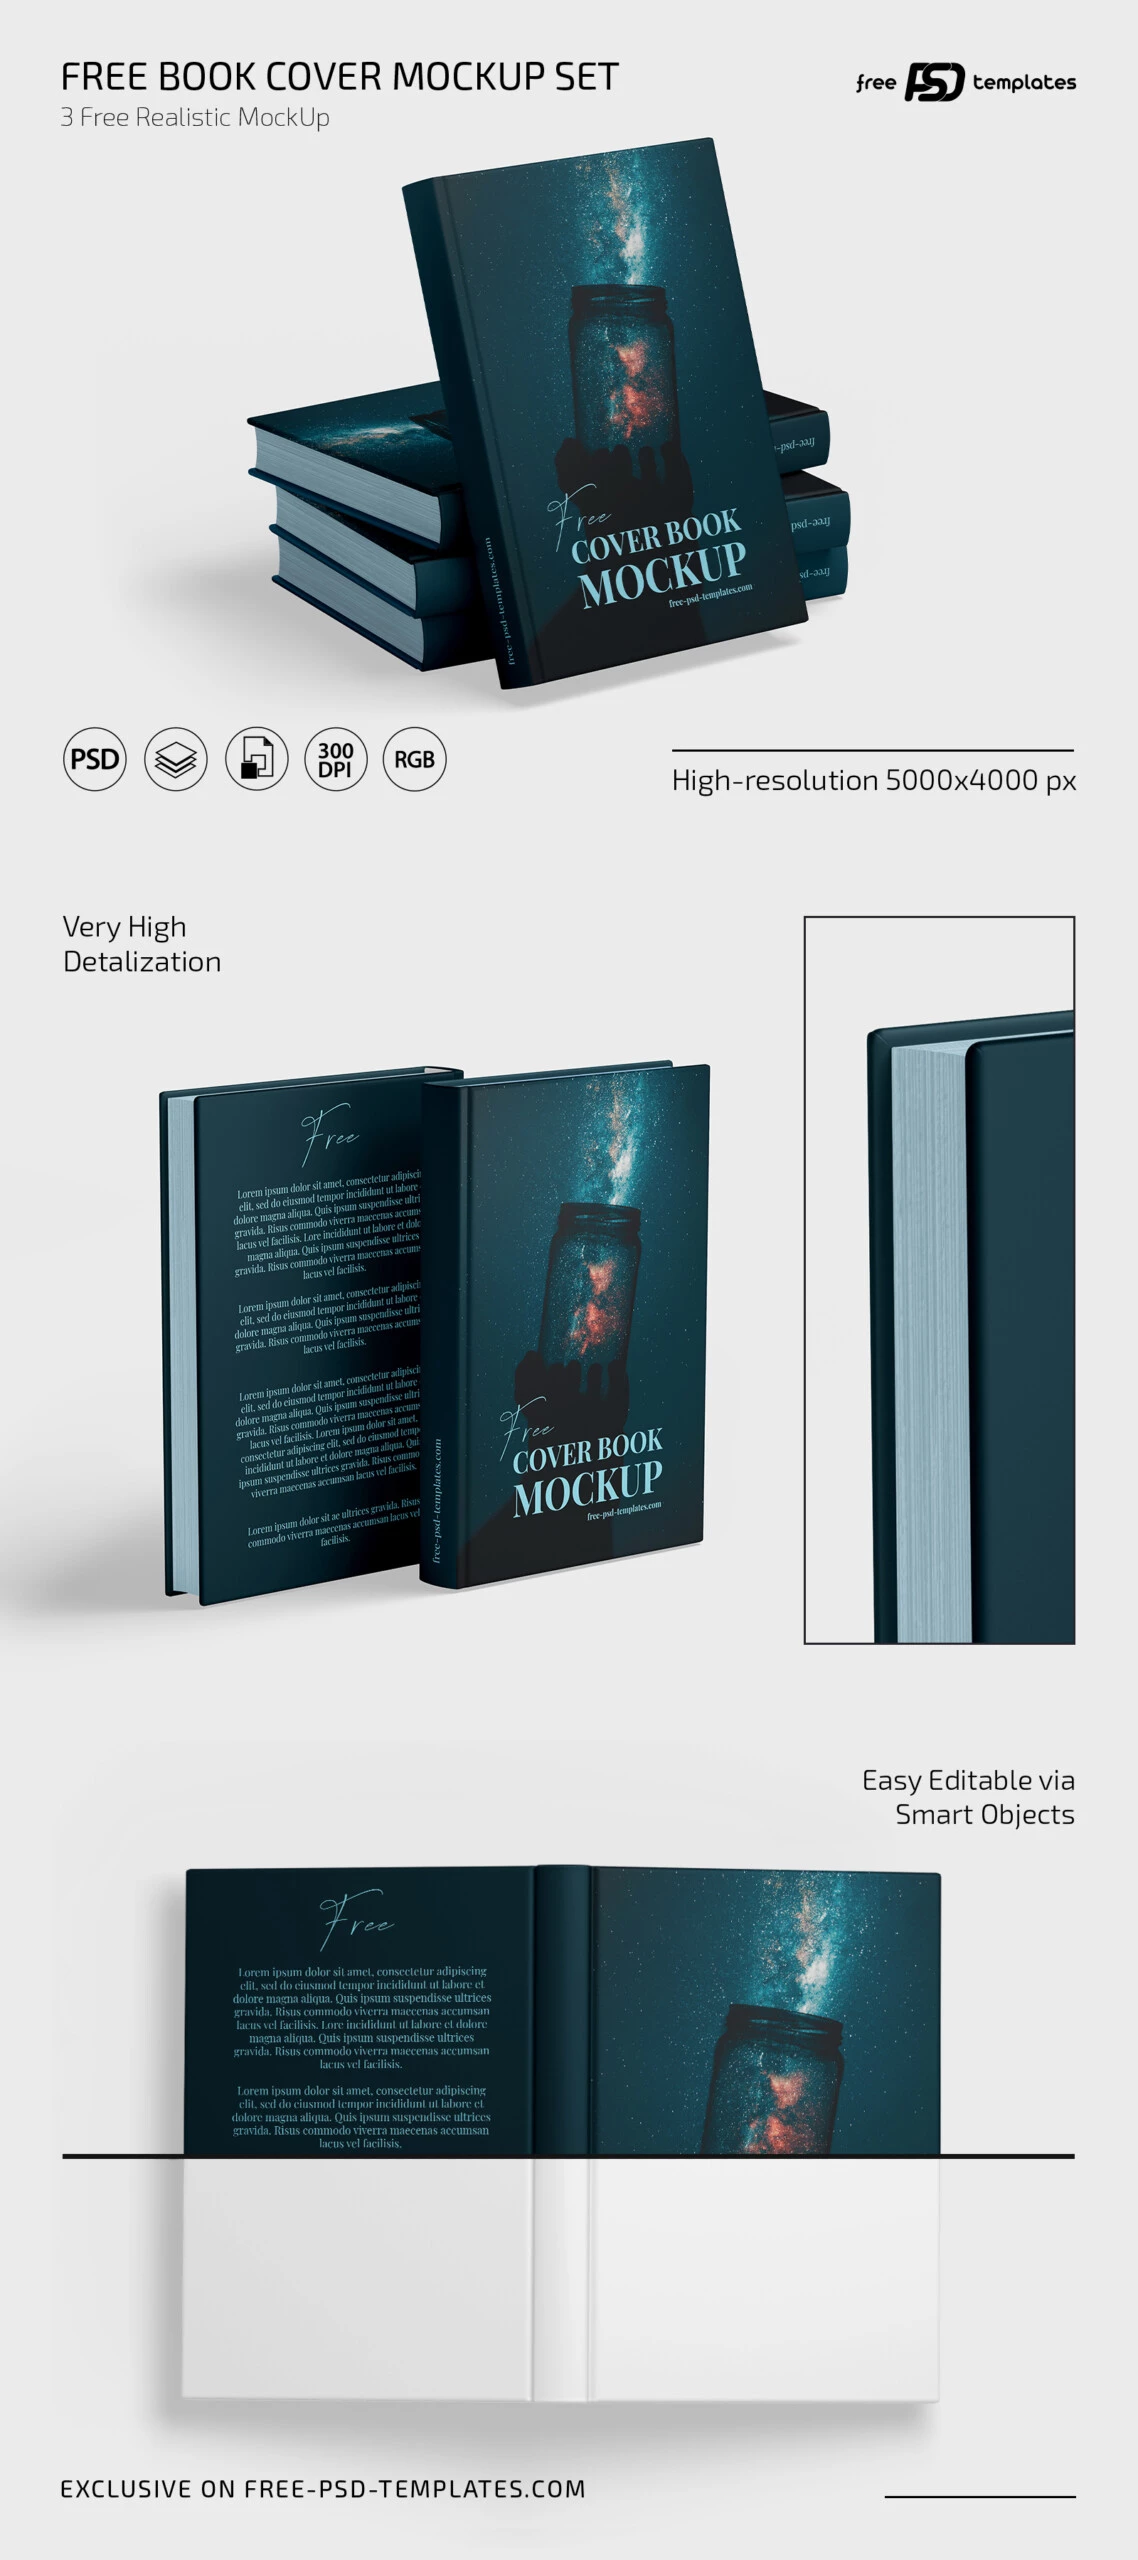 Free BOOK COVER MOCKUP – Free PSD Templates